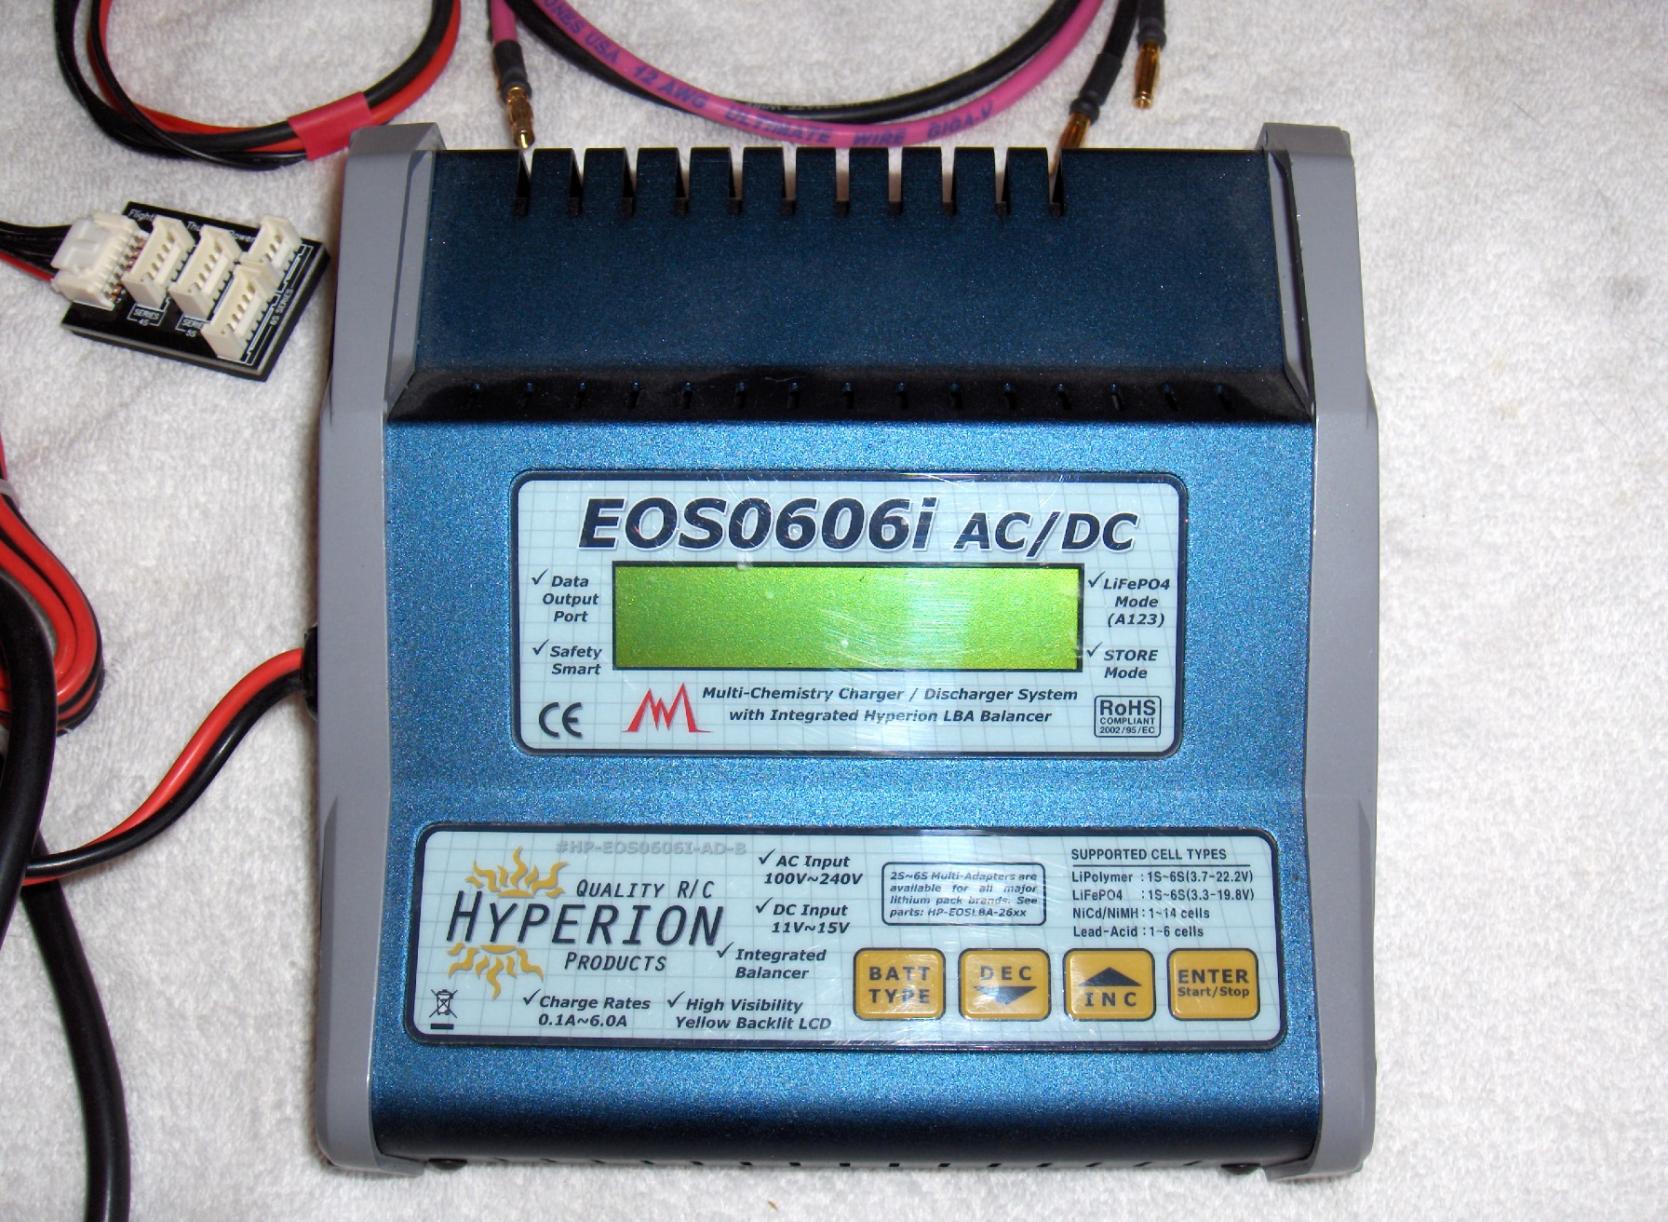 Hyperion EOS0606i AC/DC Charger - Tech Forums